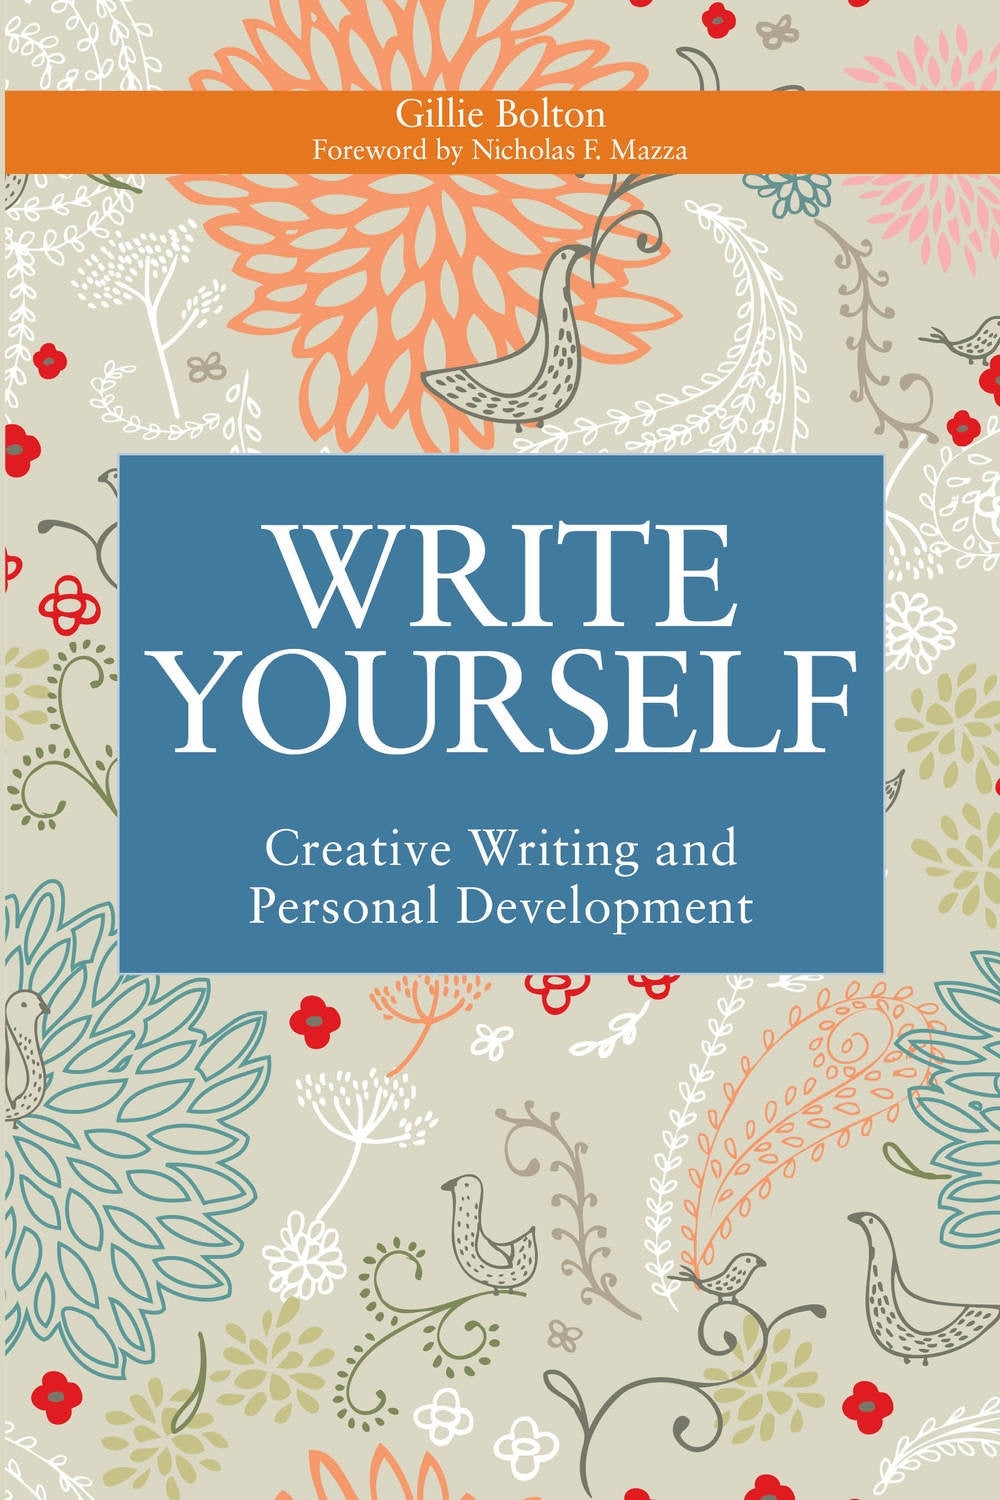 Write Yourself by Penelope Shuttle, Gillie Bolton